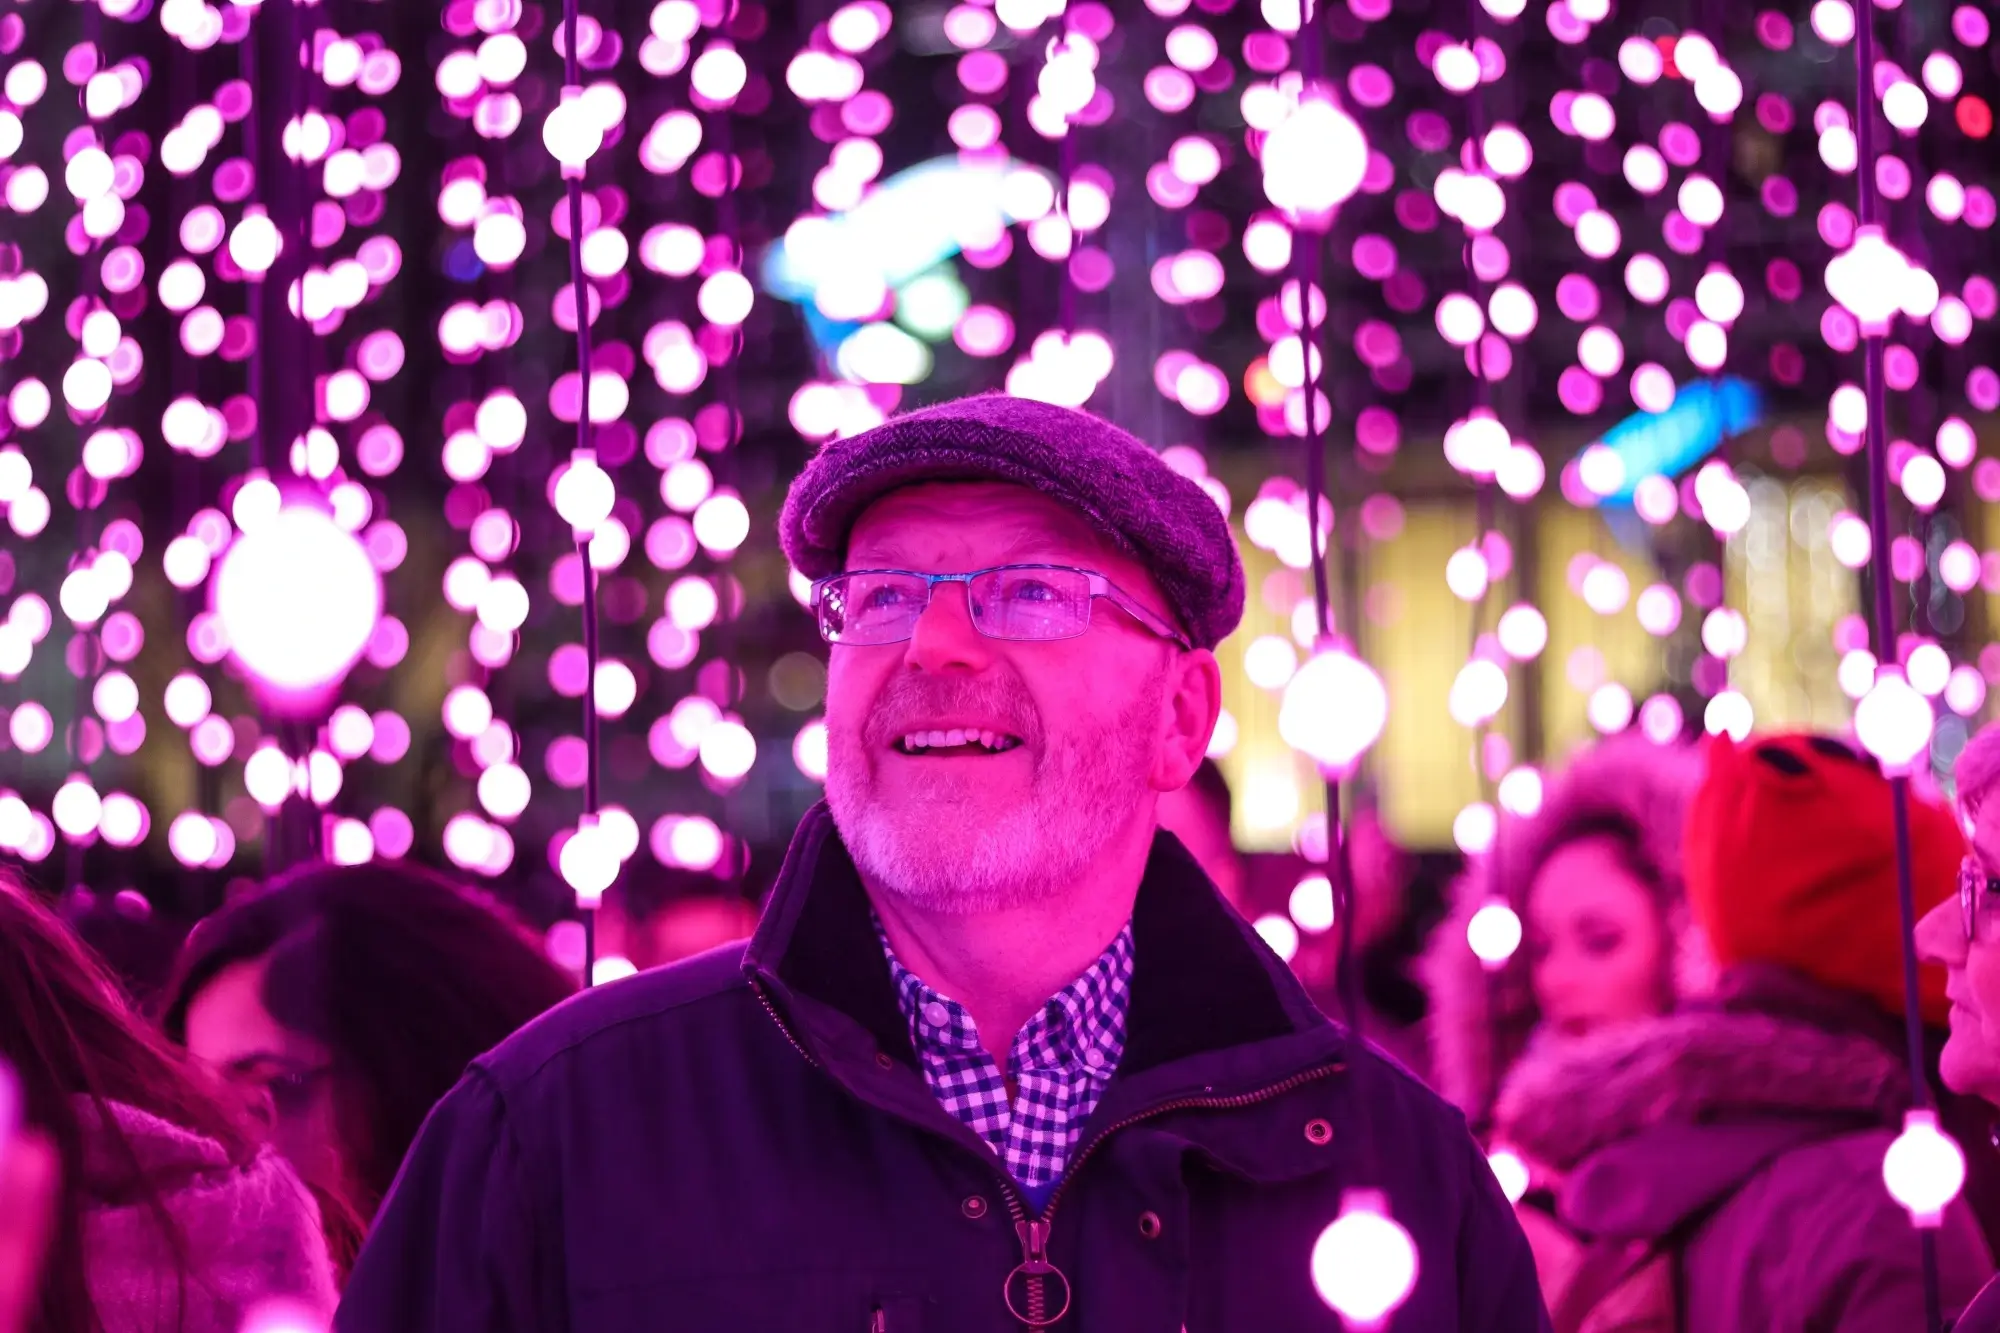 A retired man enjoying the lights on a festive evening, representing the concept of super contributions.